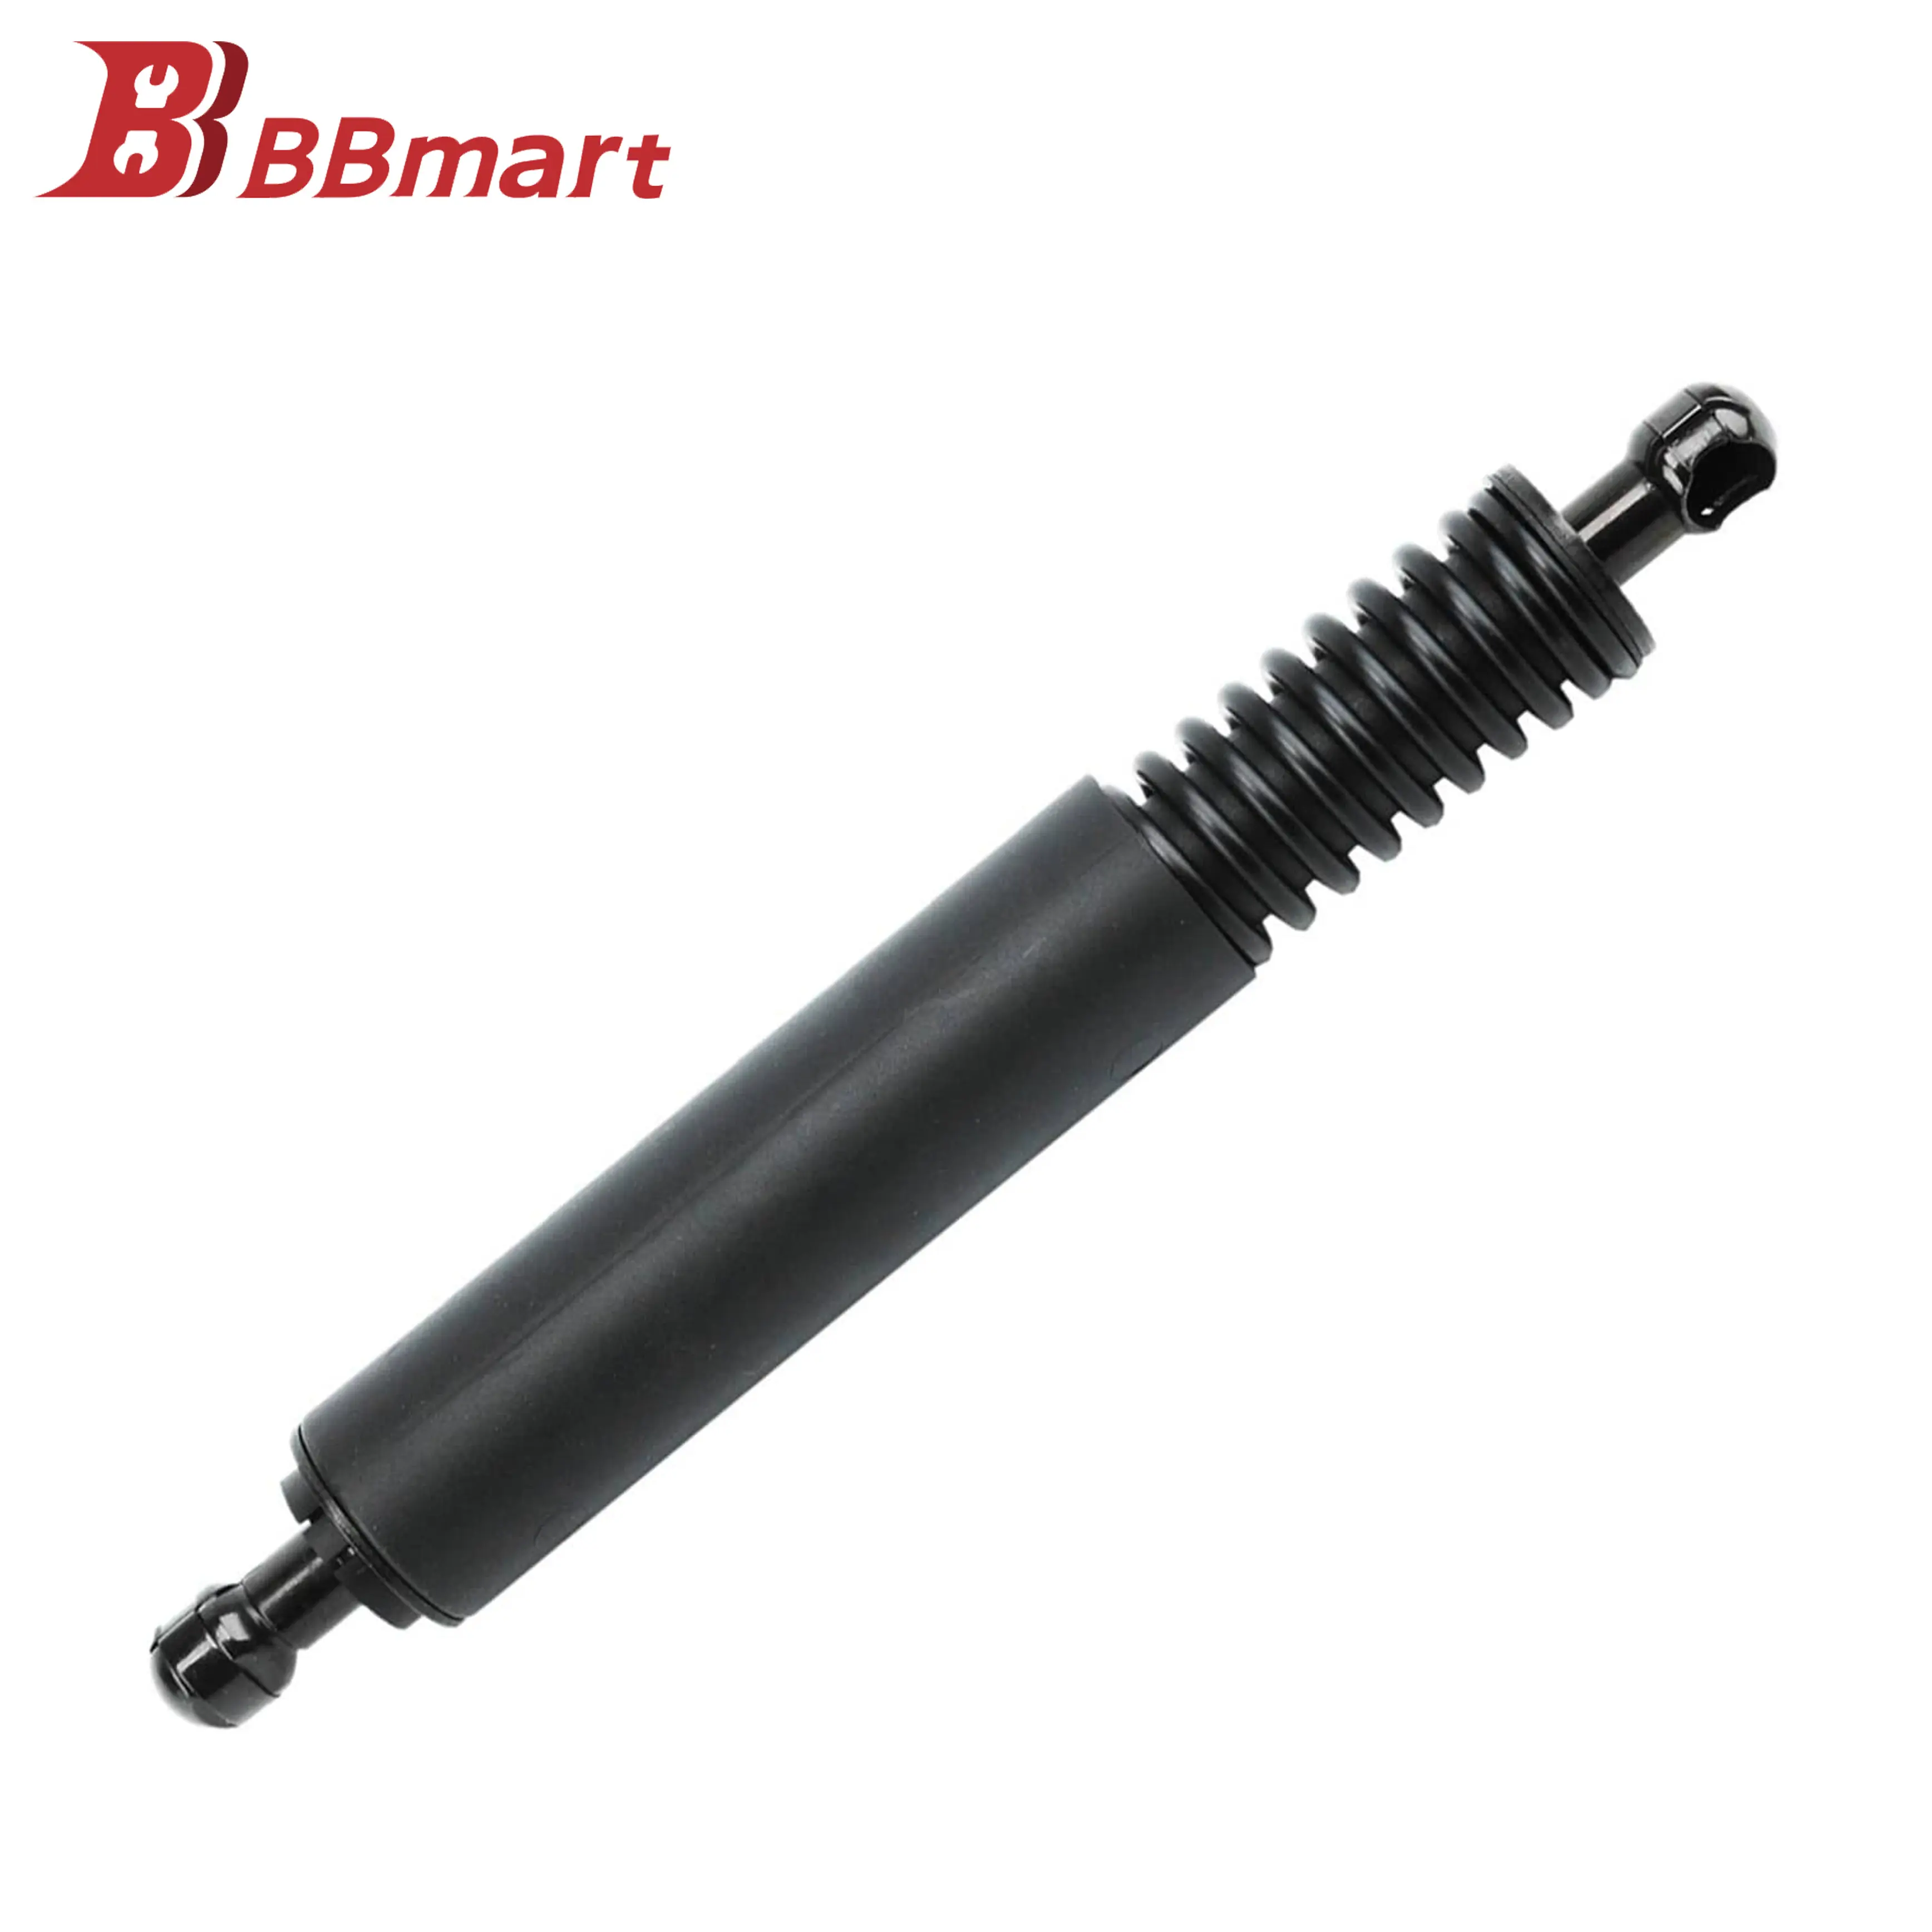 BBmart Auto Spare Car Parts Rear Right Hatch Tailgate Lift Support Shock Struts For Prosche Cayenne VW TOUAREG AUDI Q7 OE 95551255006